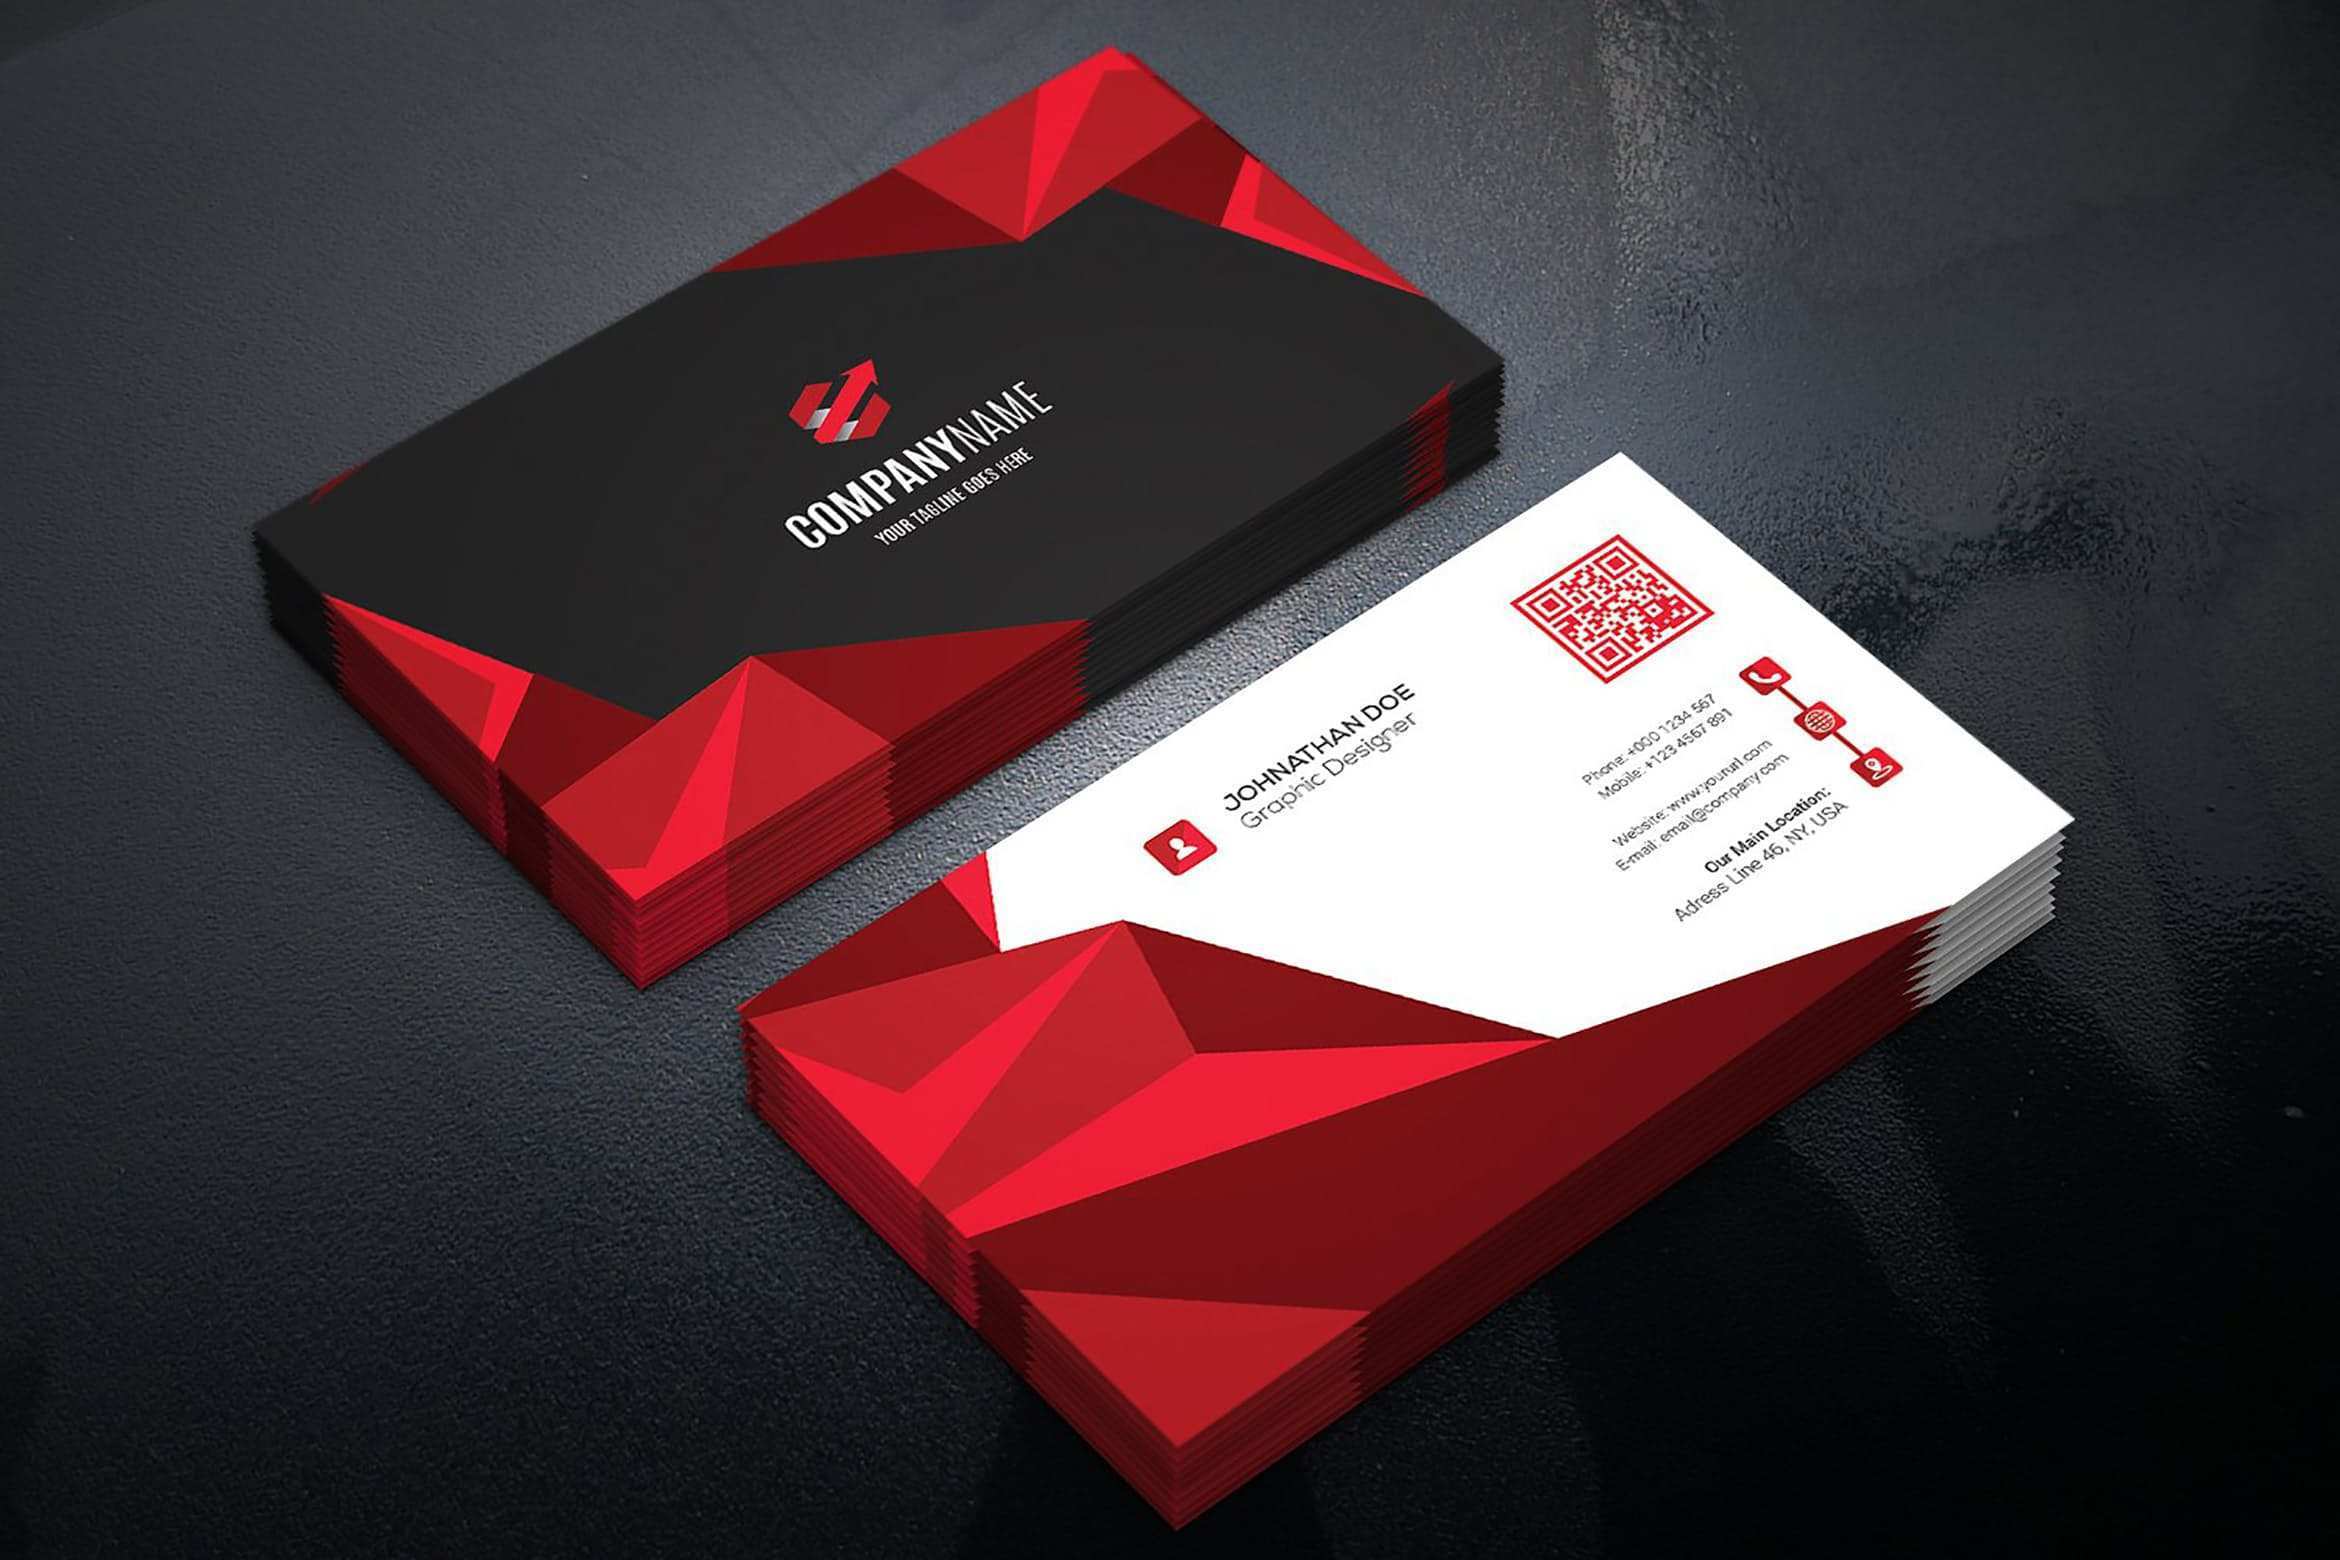 Graphic Designer Business Cards / 60 High Qty Business Card Designs Part 1 Graphics Design Graphic Design Blog / Fotor's business card maker allows you design customized business card online easily and quickly.